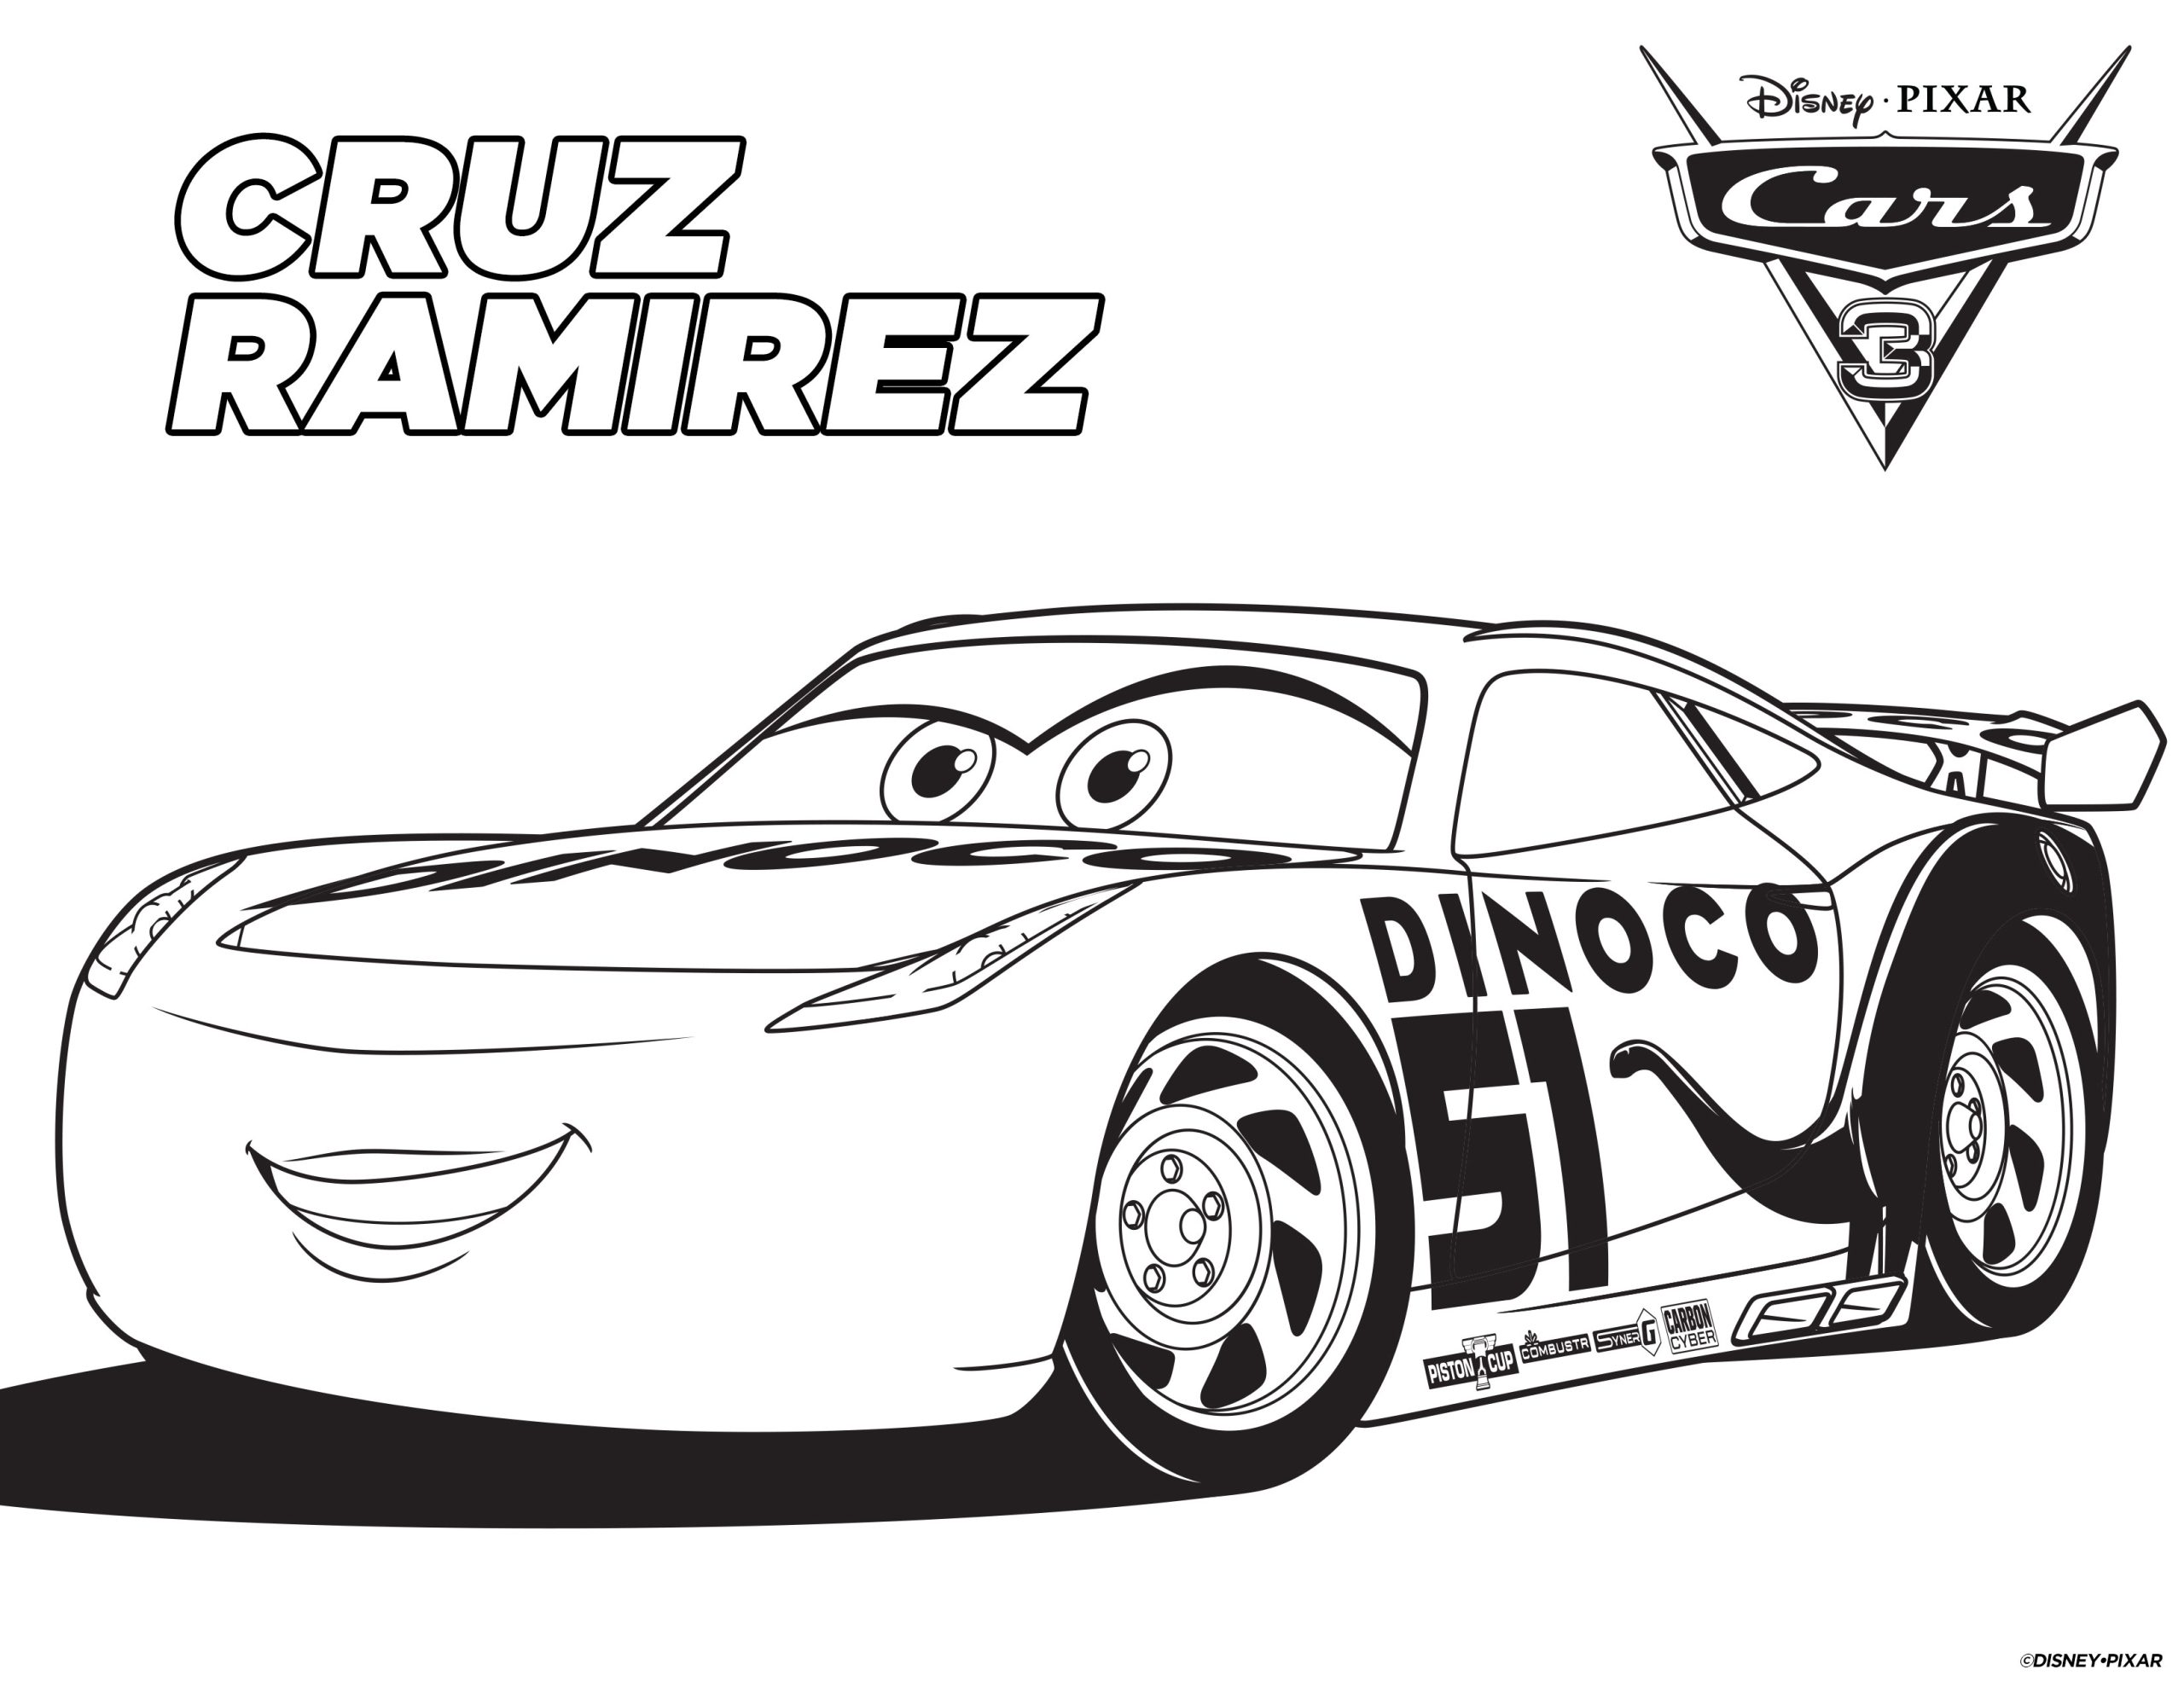 Cars 20 coloring pages  free printable coloring sheets for Cars 20 - Otakugadgets